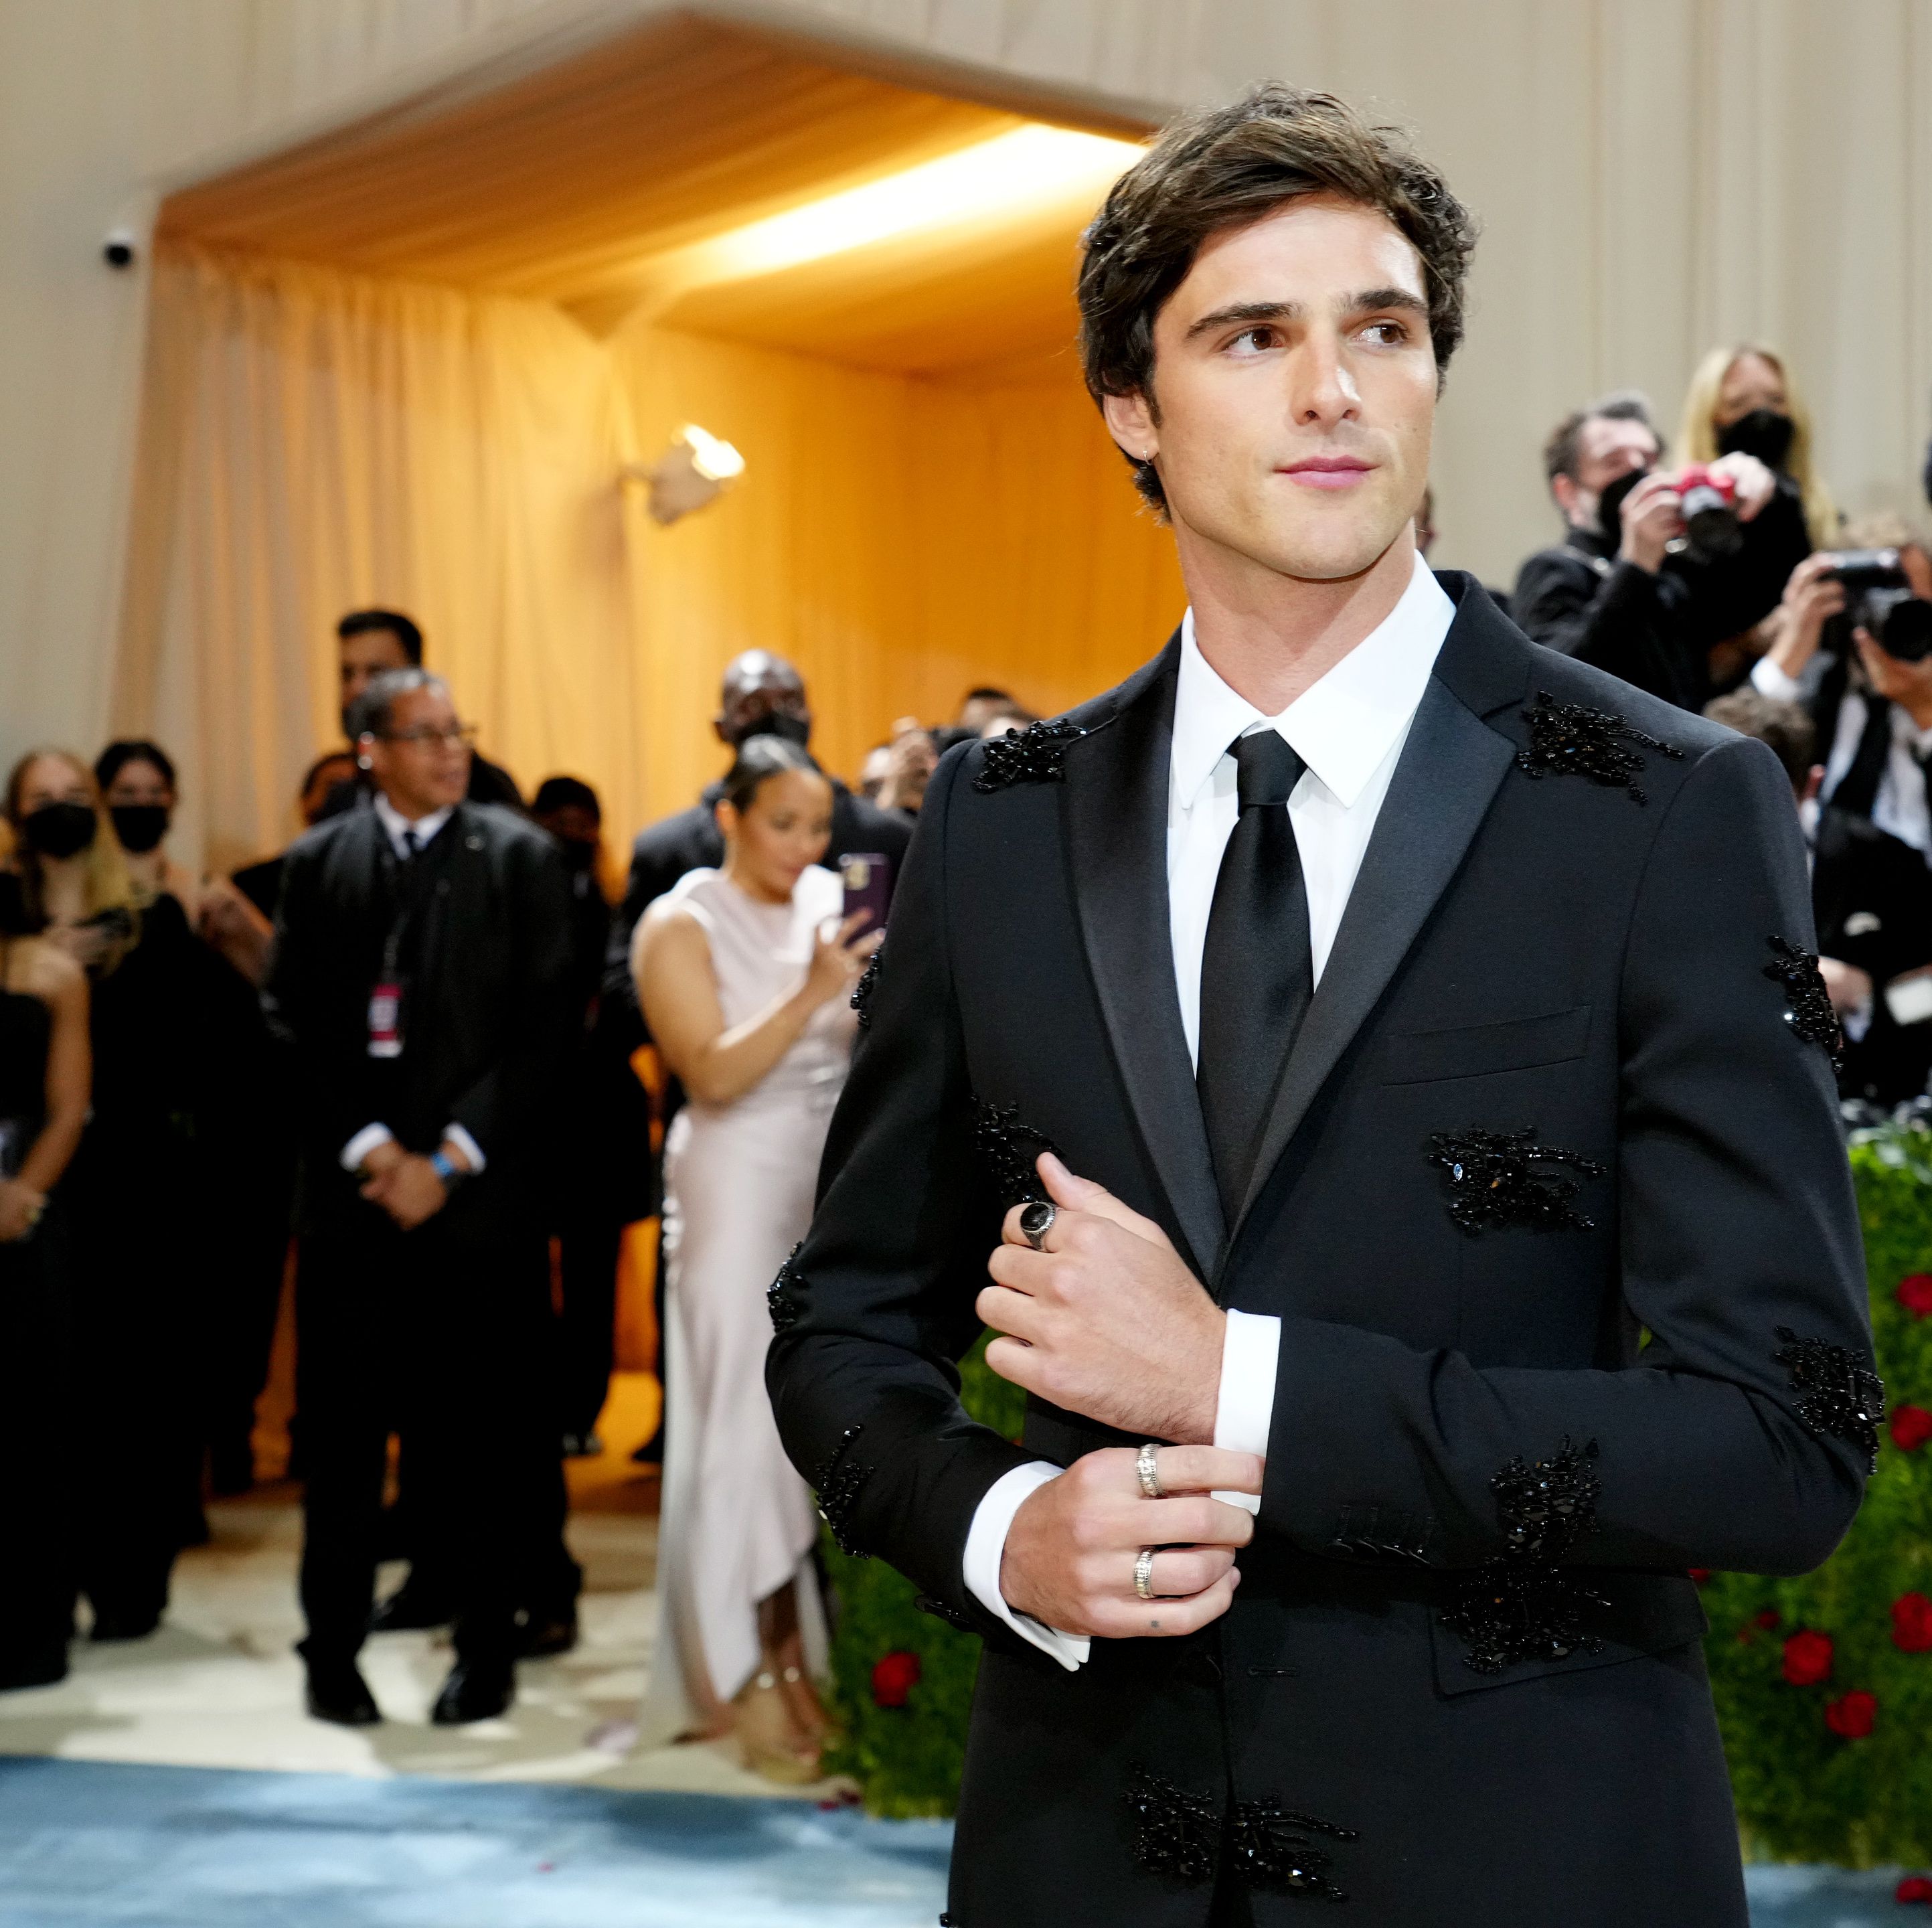 Jacob Elordi Used an $18 Pomade for the Met Gala